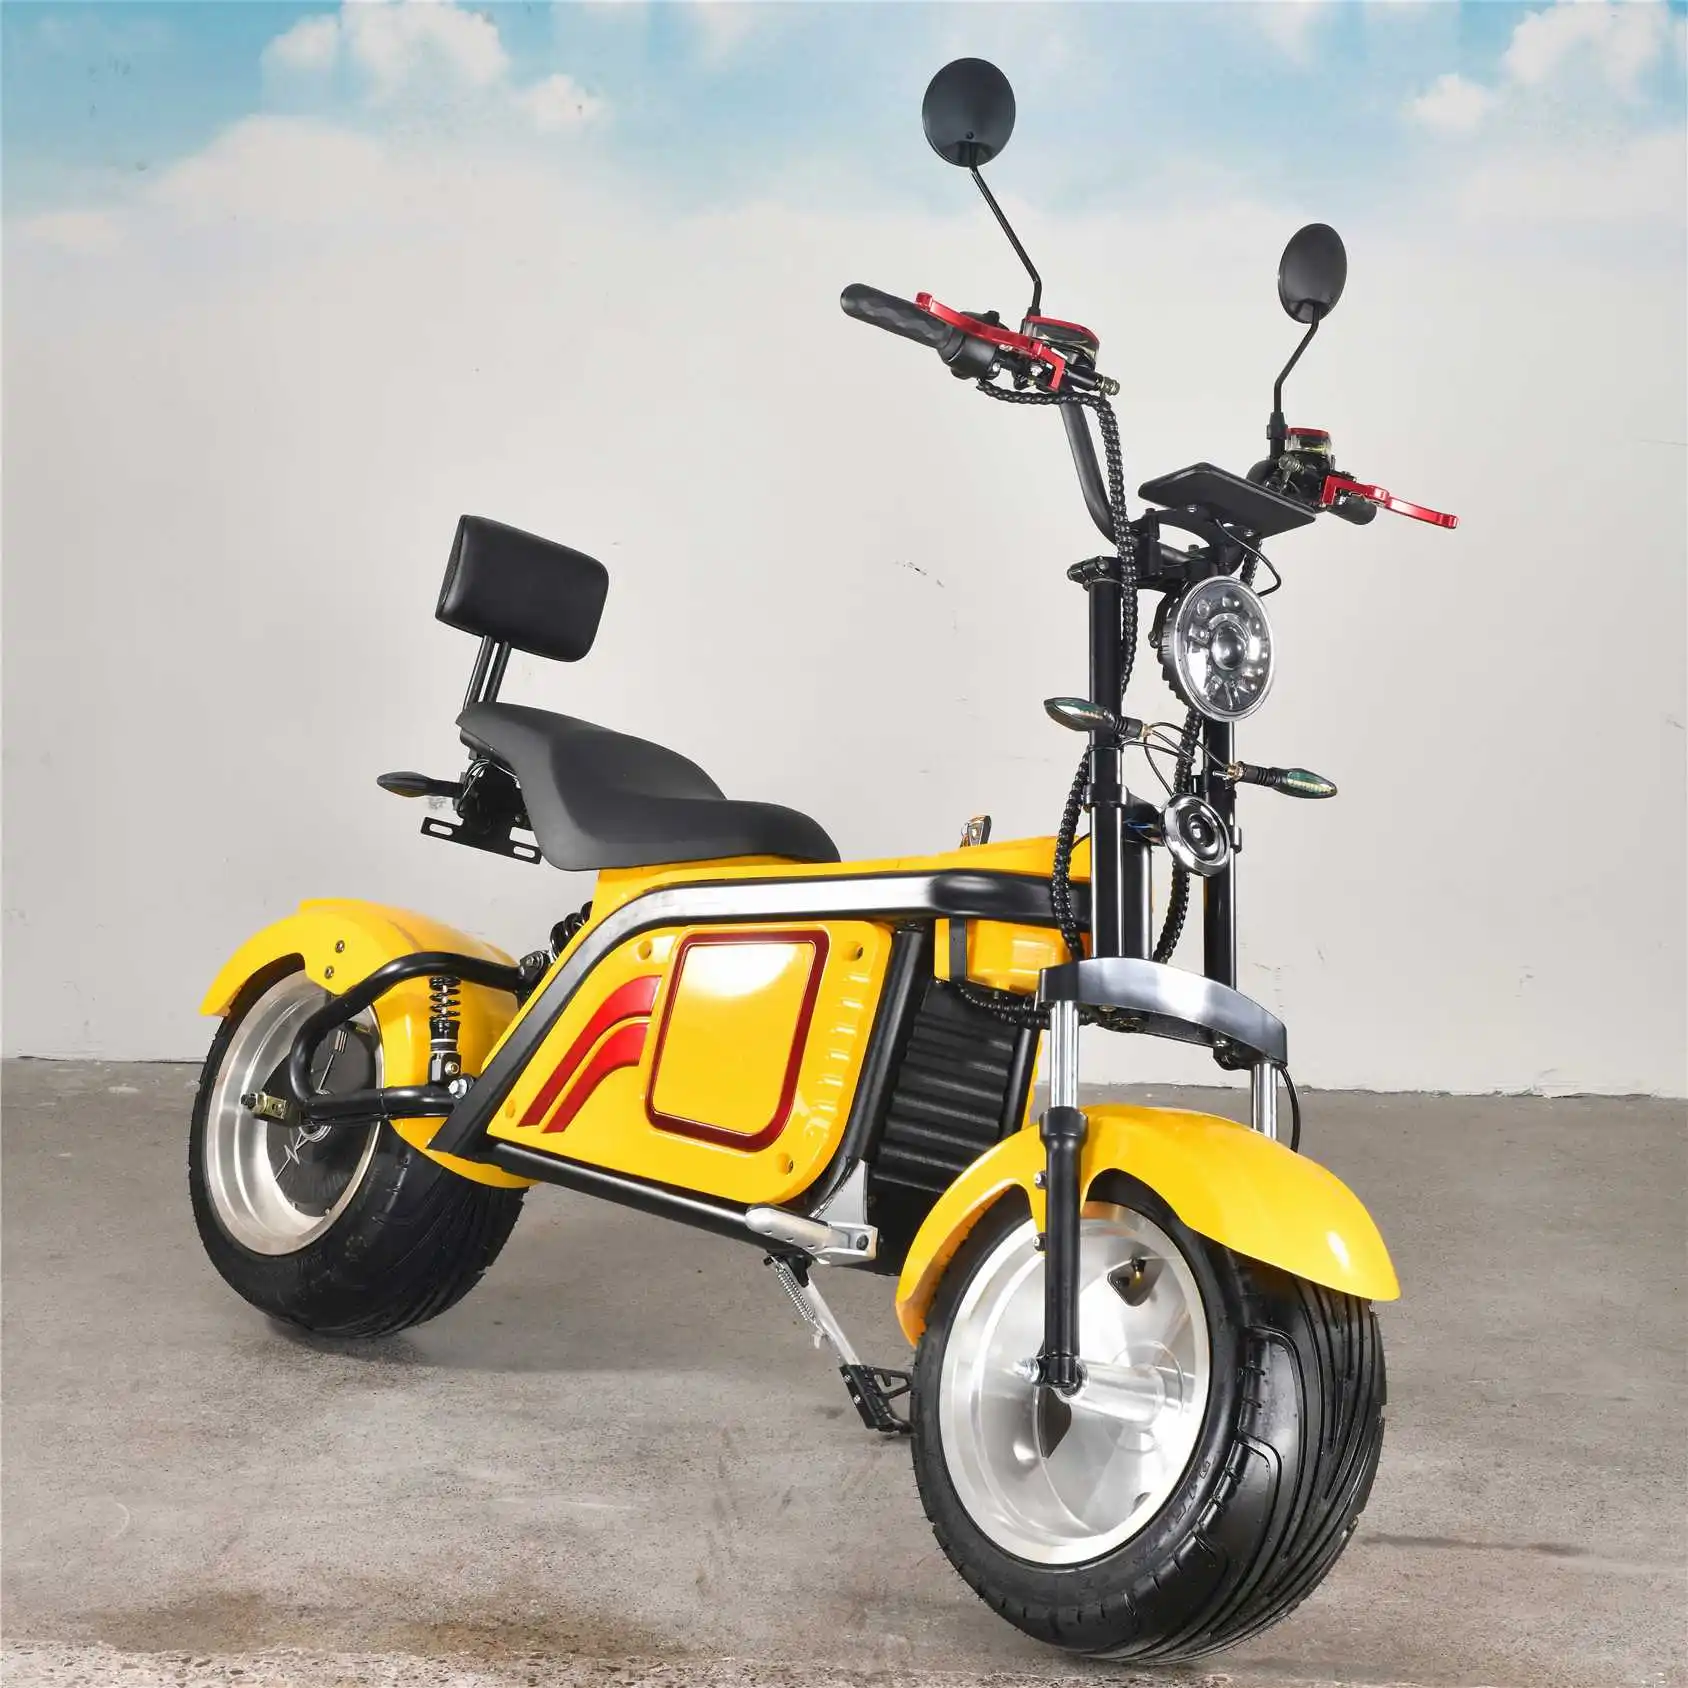 

Holland Warehouse New CE 3000W E-Citycoco 60V 80Km/H Lithium Battery Removable Fat Tire Electric Scooter City Coco Citycoco